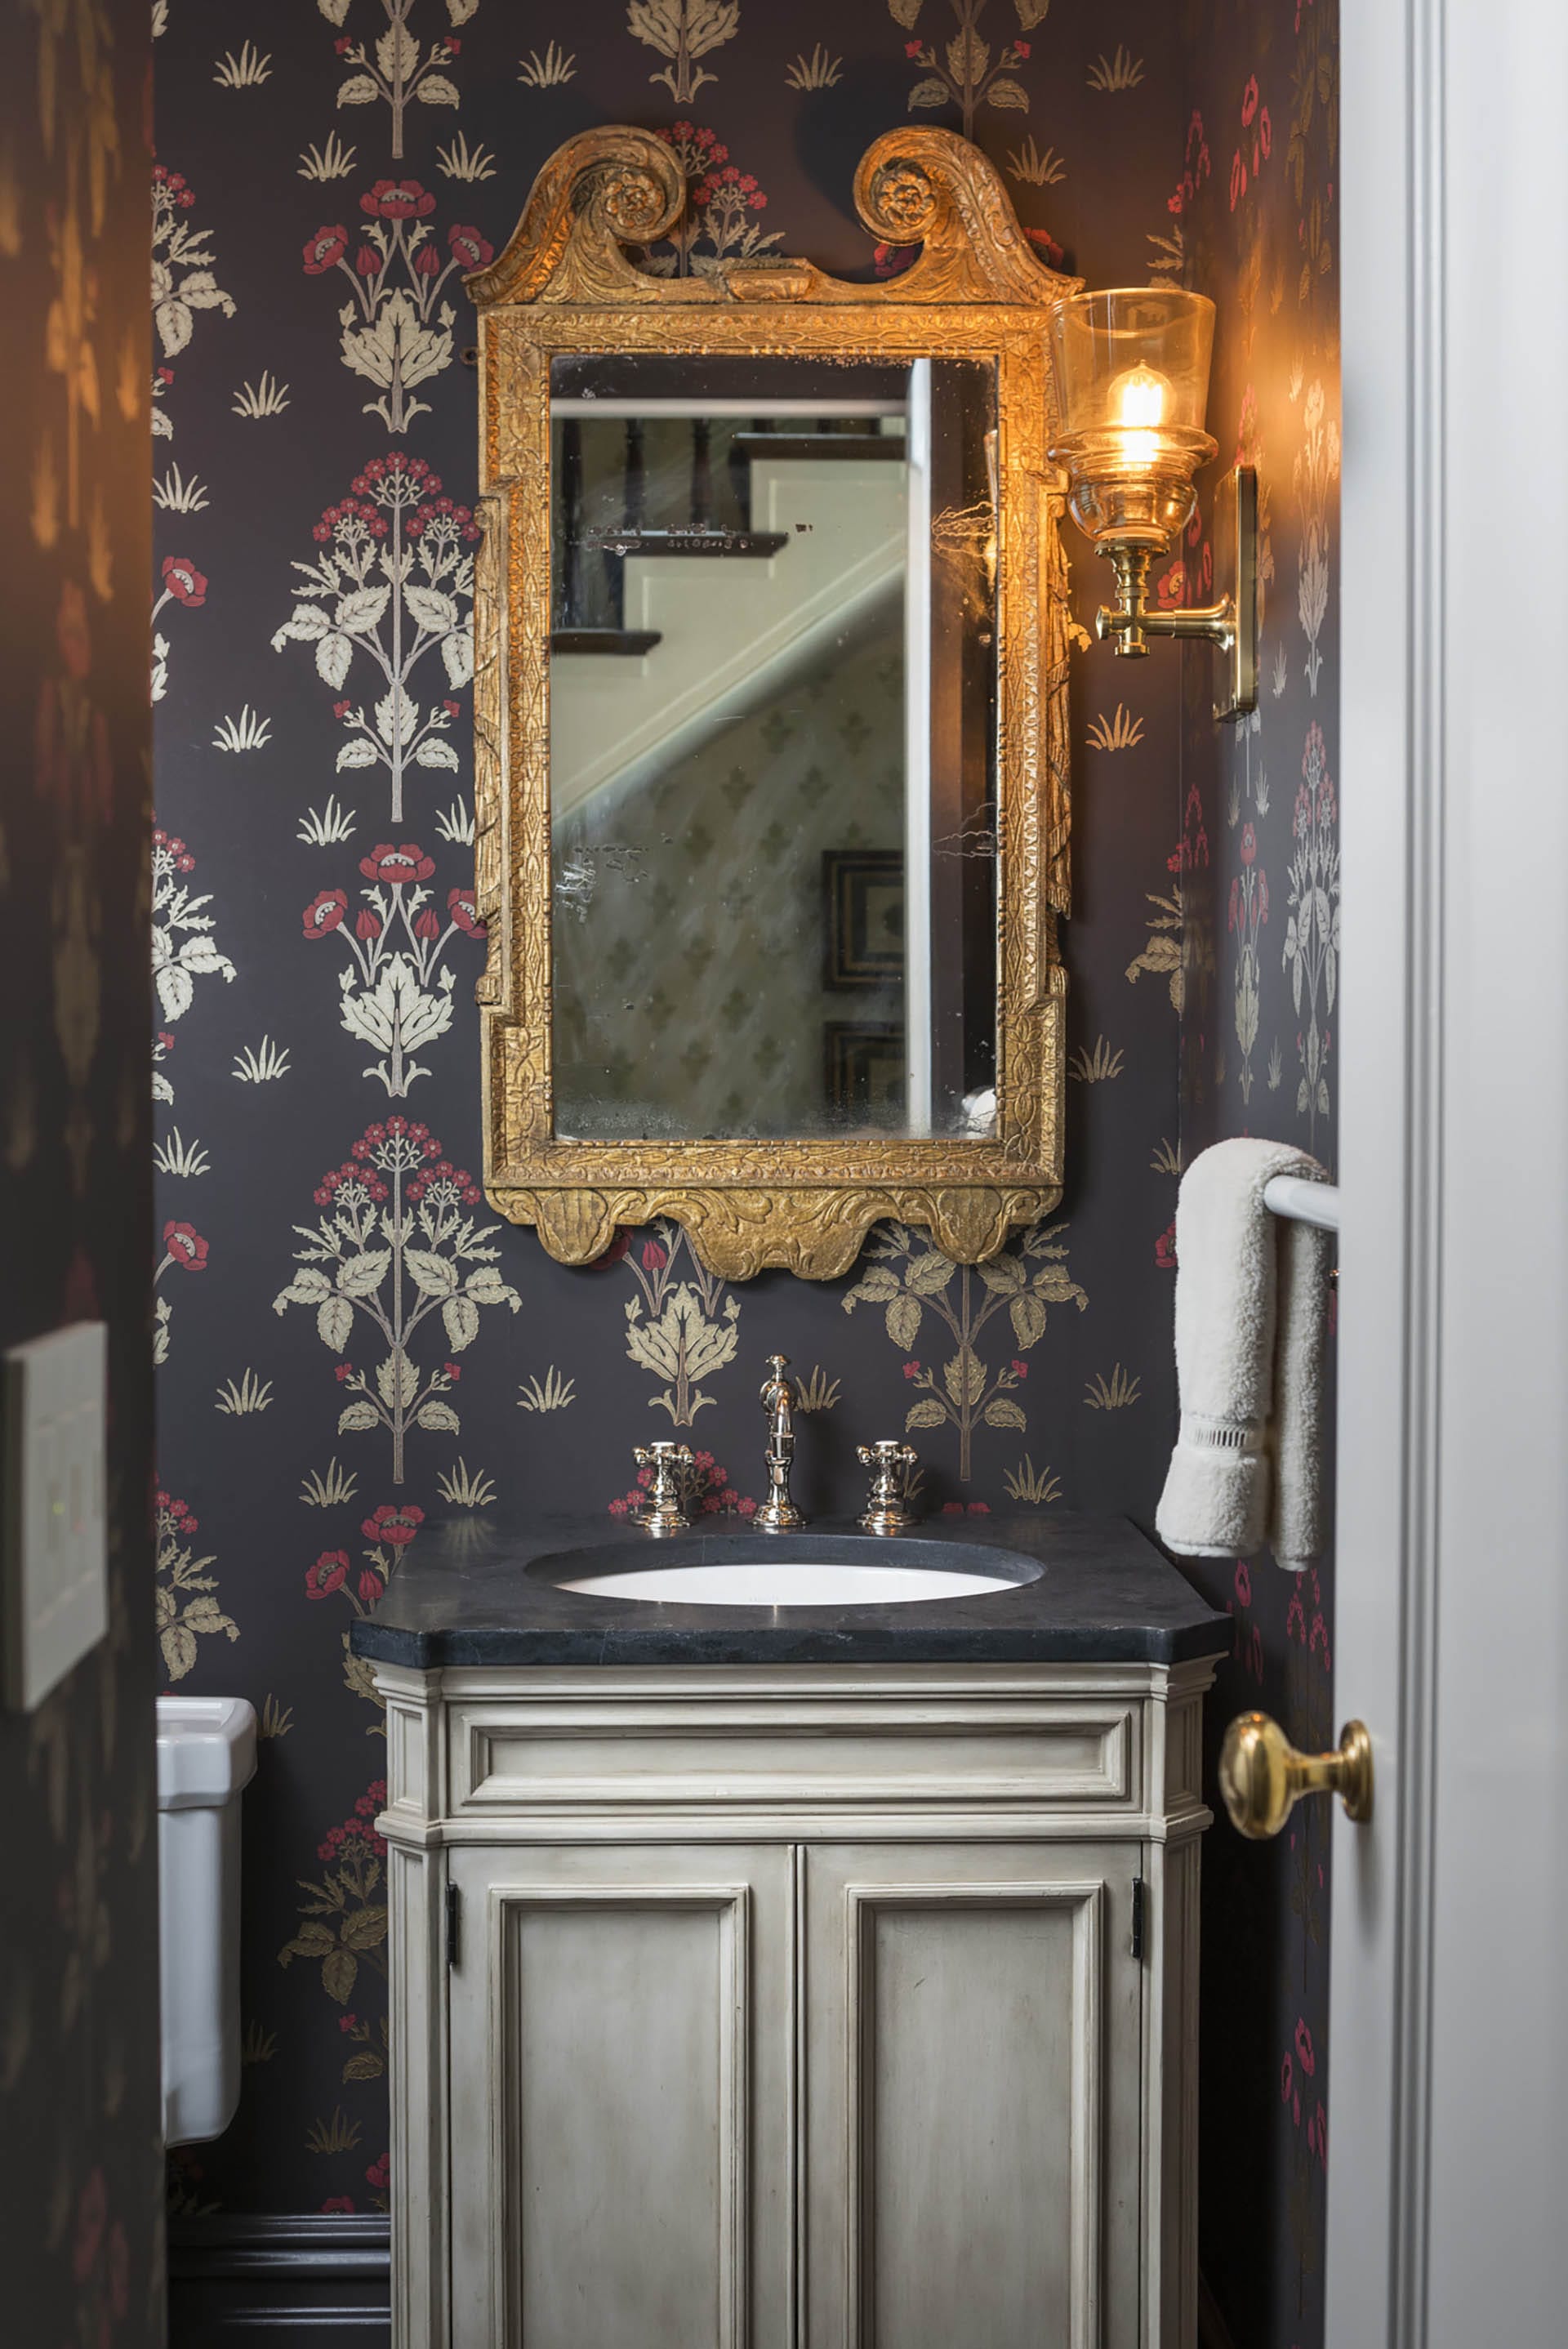 Powder room with an ornate gold mirror, purple floral wallpaper,, and a wall sconce